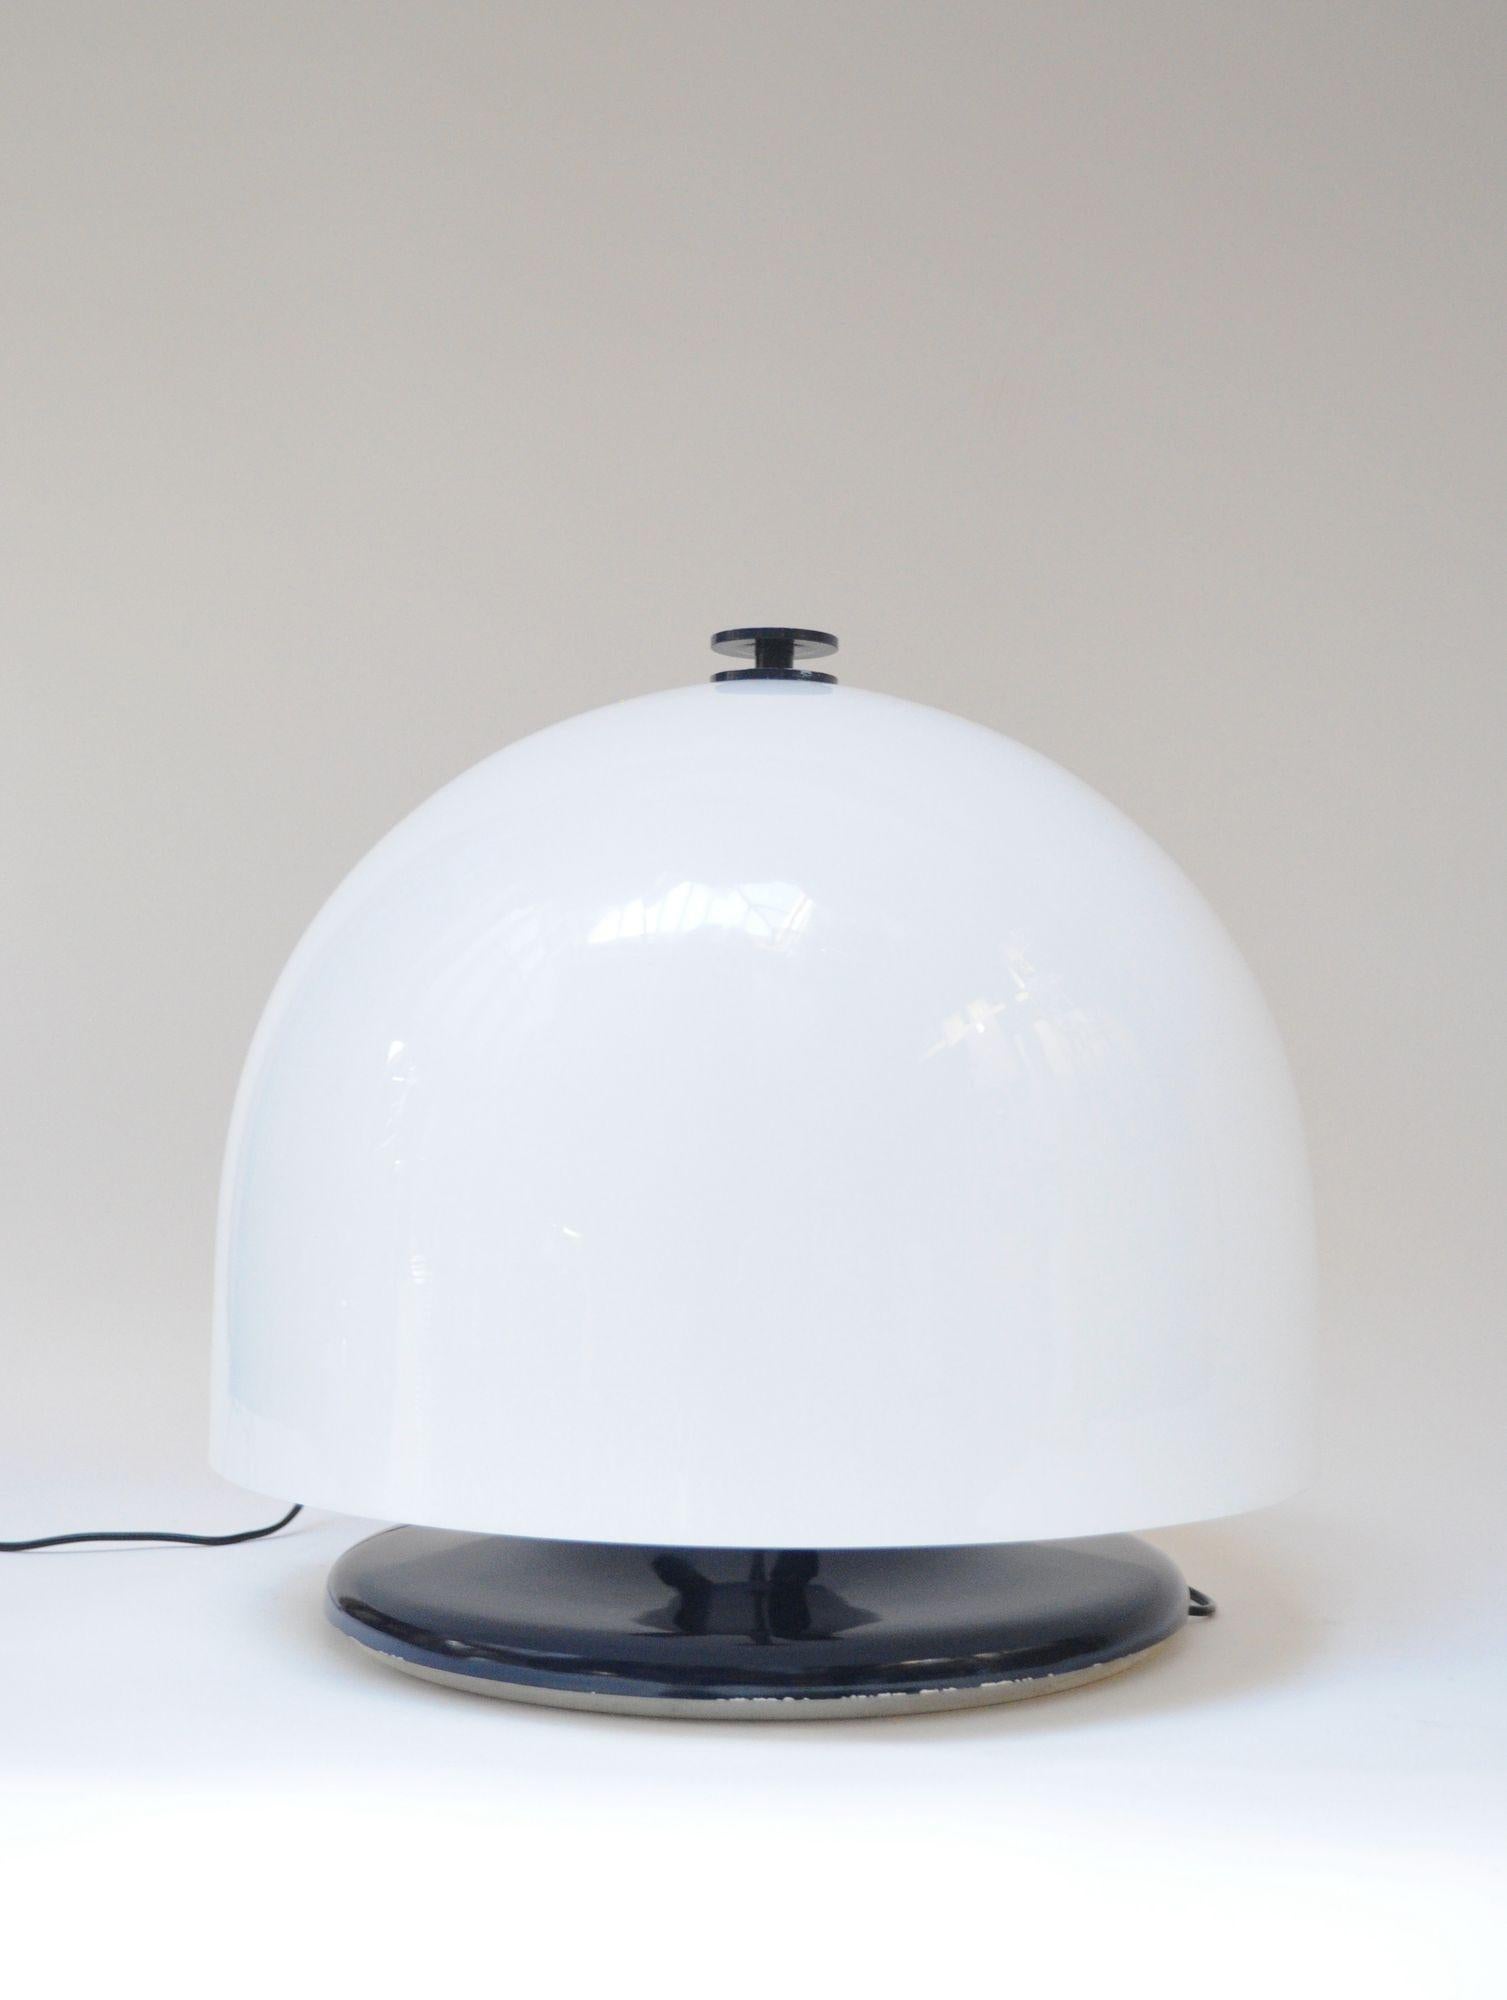 Vintage Italian Space Age Dome Mushroom Table Lamp in Enameled Metal and Acrylic For Sale 11